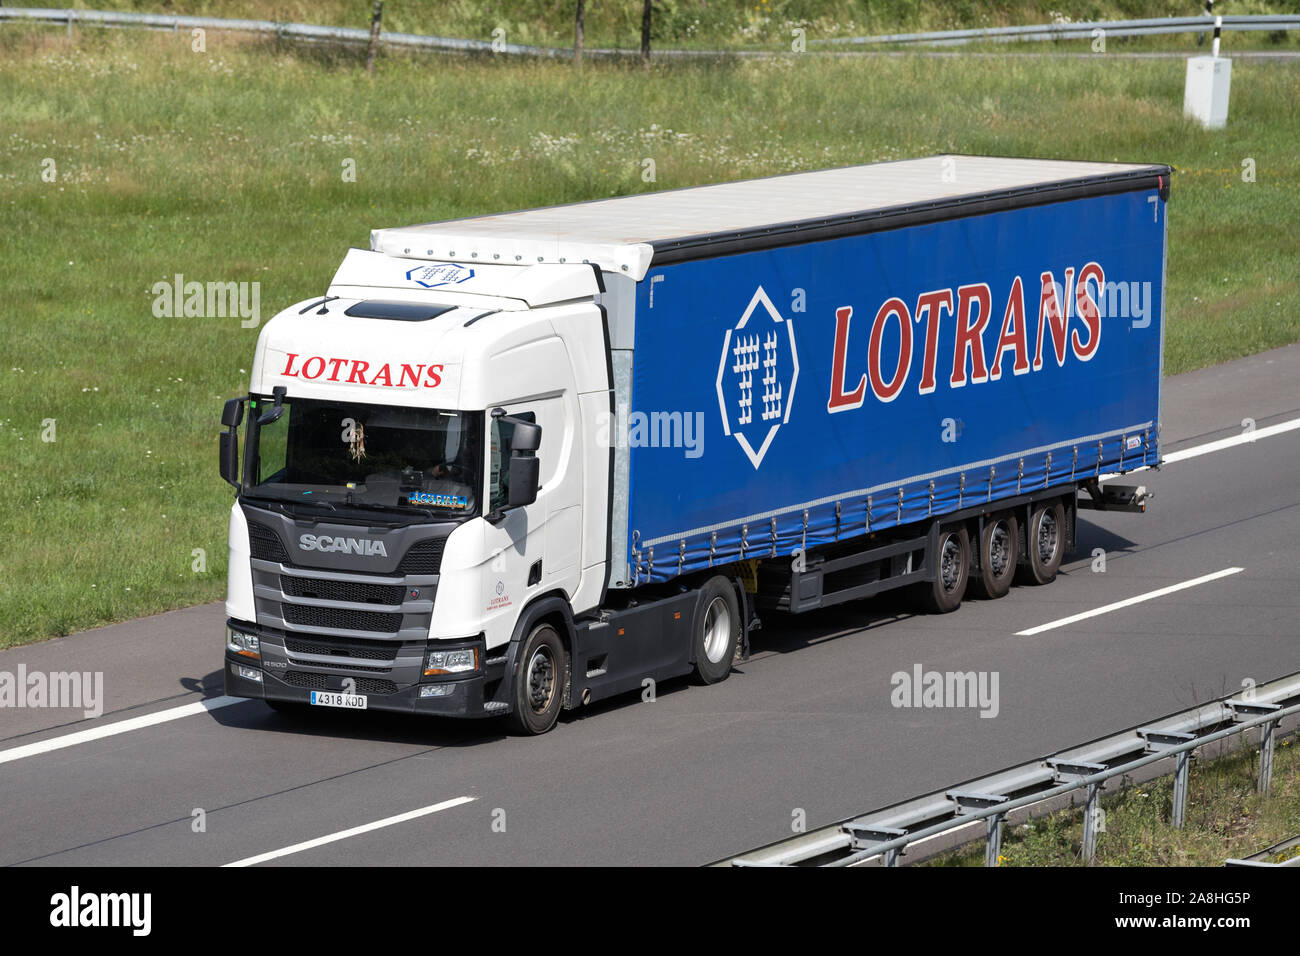 Lotrans Scania truck with curtainside trailer on motorway. Stock Photo